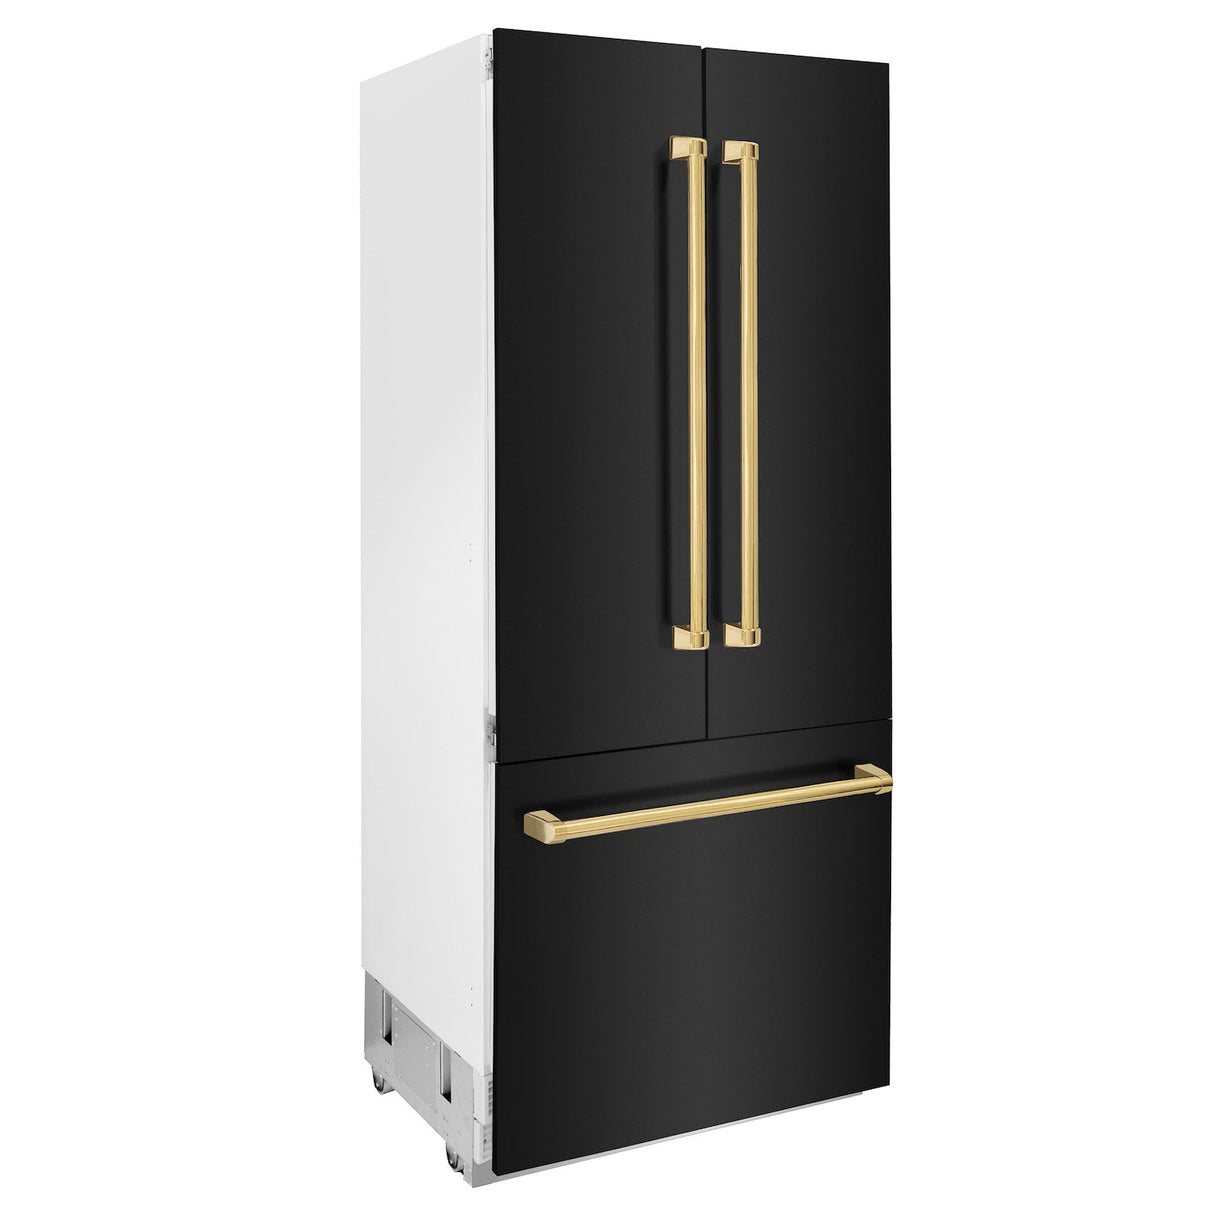 ZLINE Autograph Edition 36 in. 19.6 cu. ft. Built-in 3-Door French Door Refrigerator with Internal Water and Ice Dispenser in Black Stainless Steel with Polished Gold Accents (RBIVZ-BS-36-G)